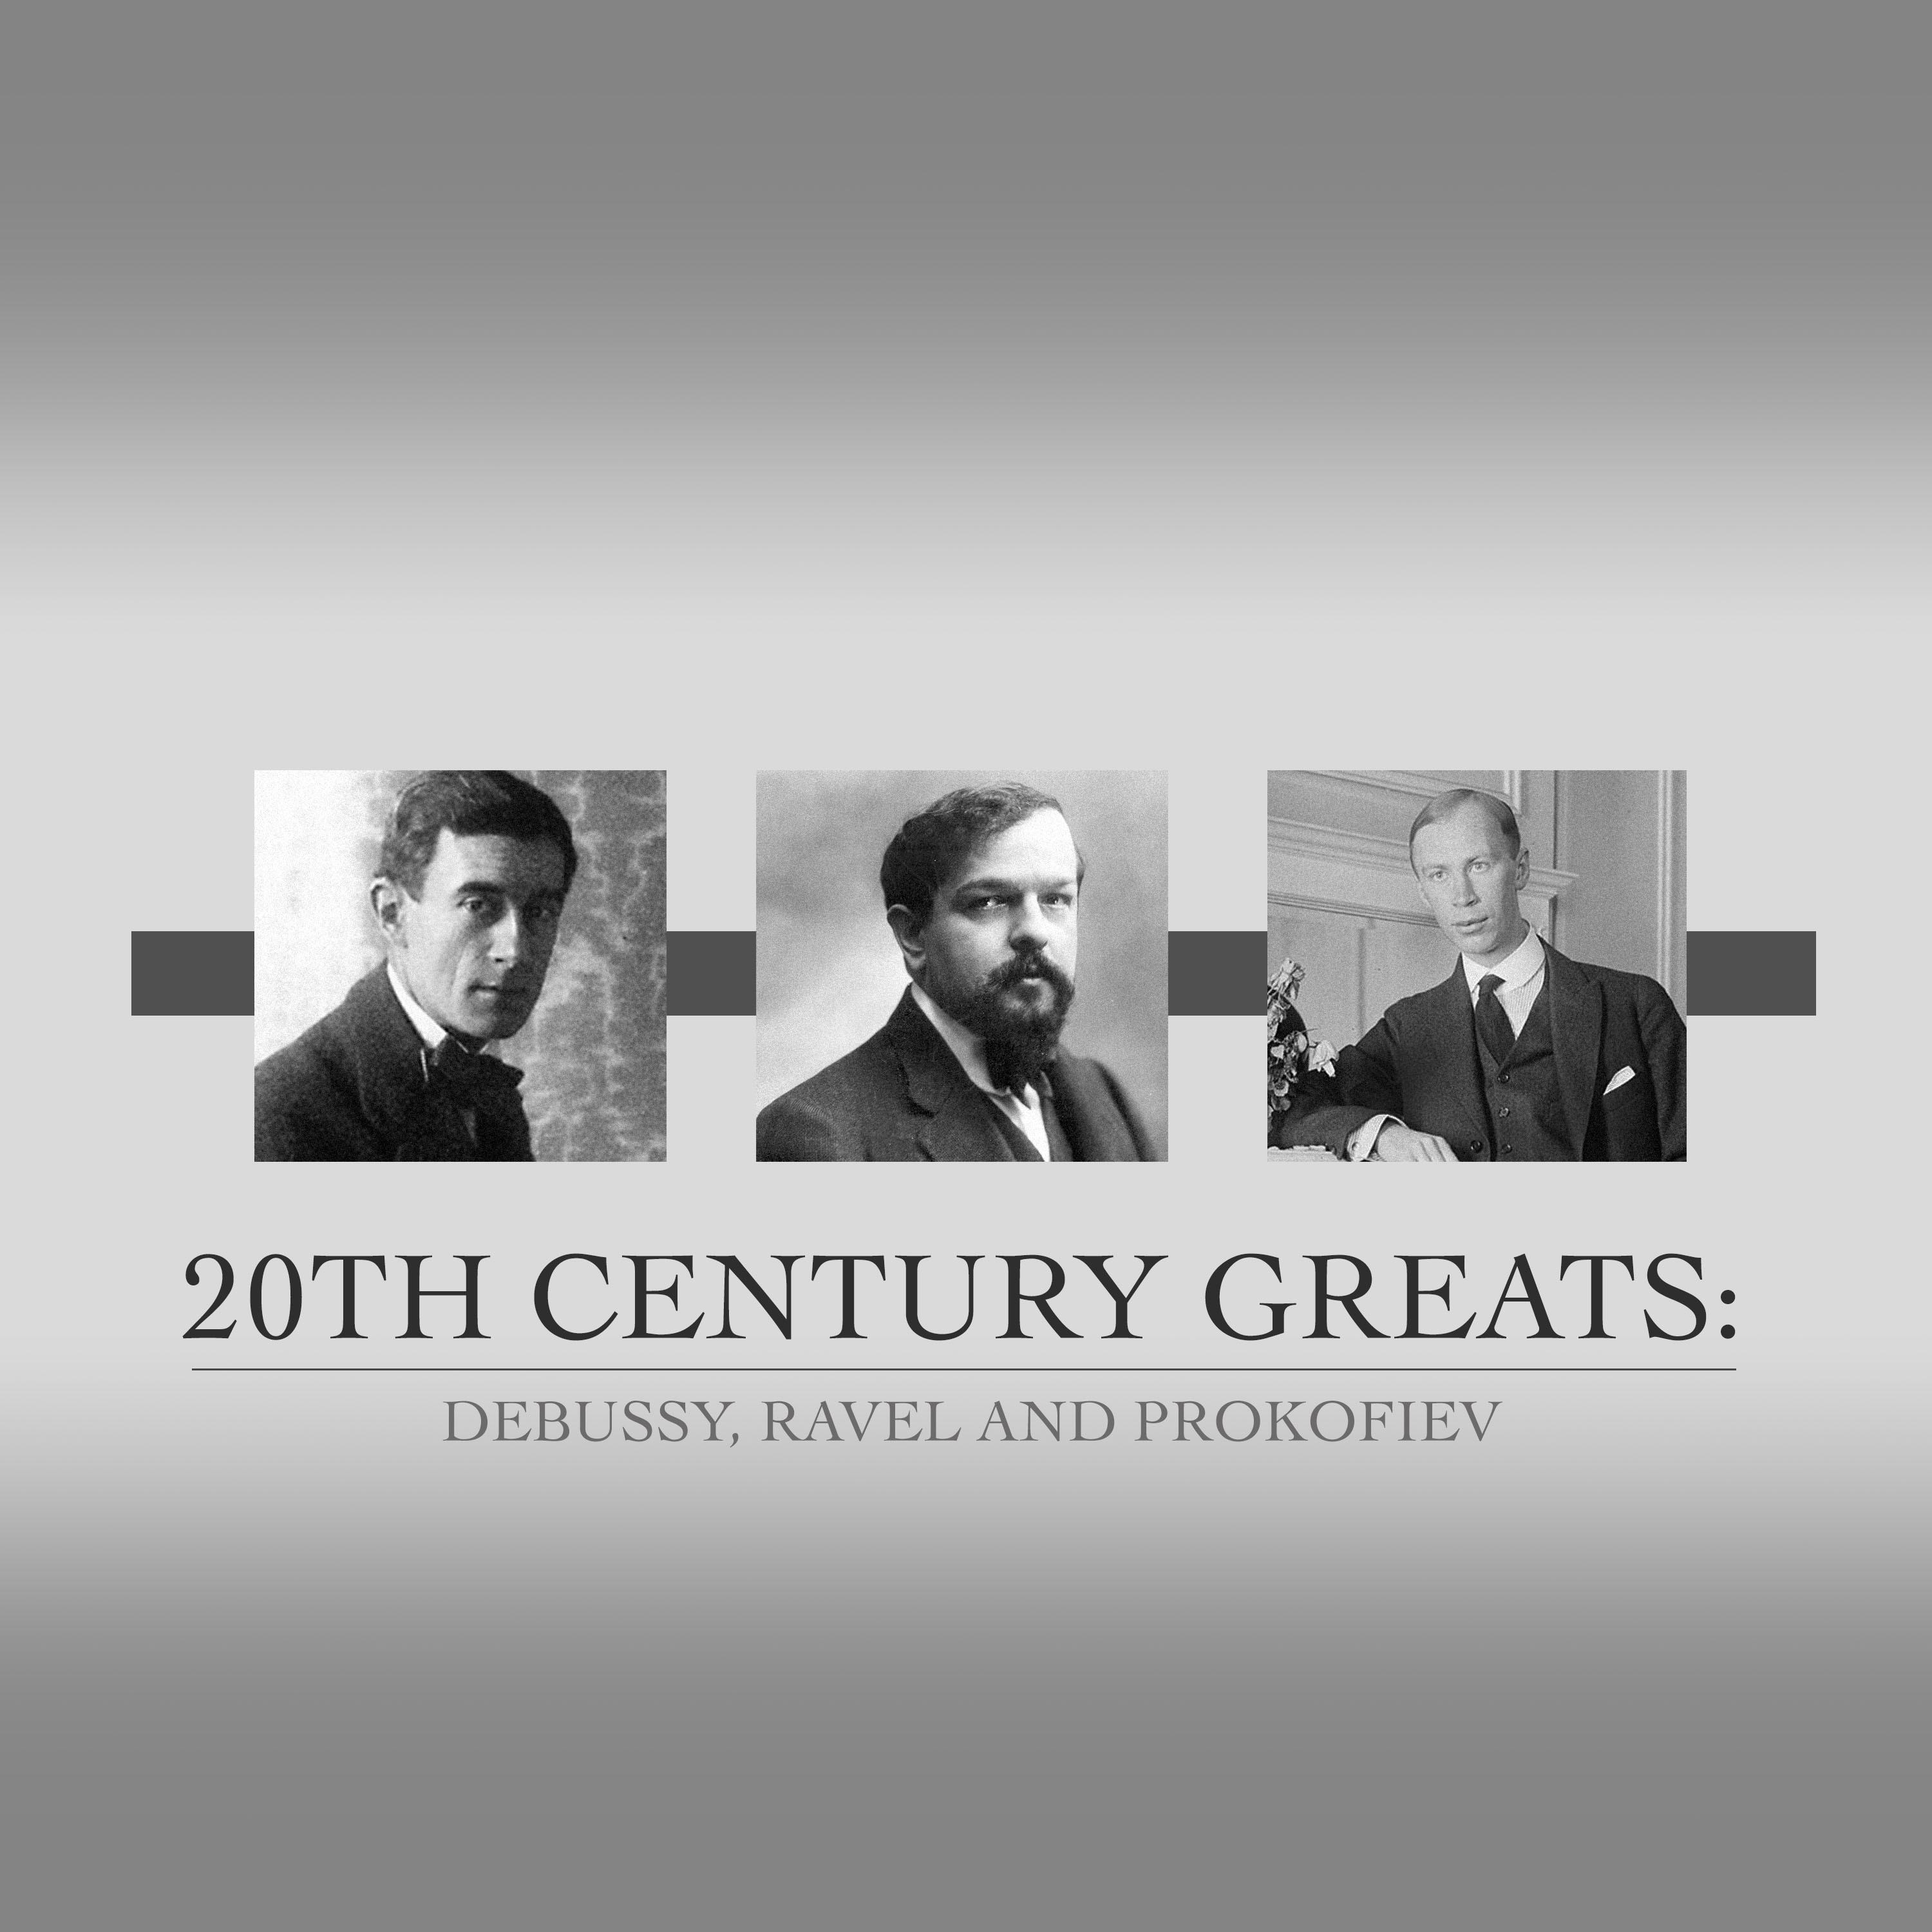 20th Century Greats: Debussy, Ravel and Prokofiev